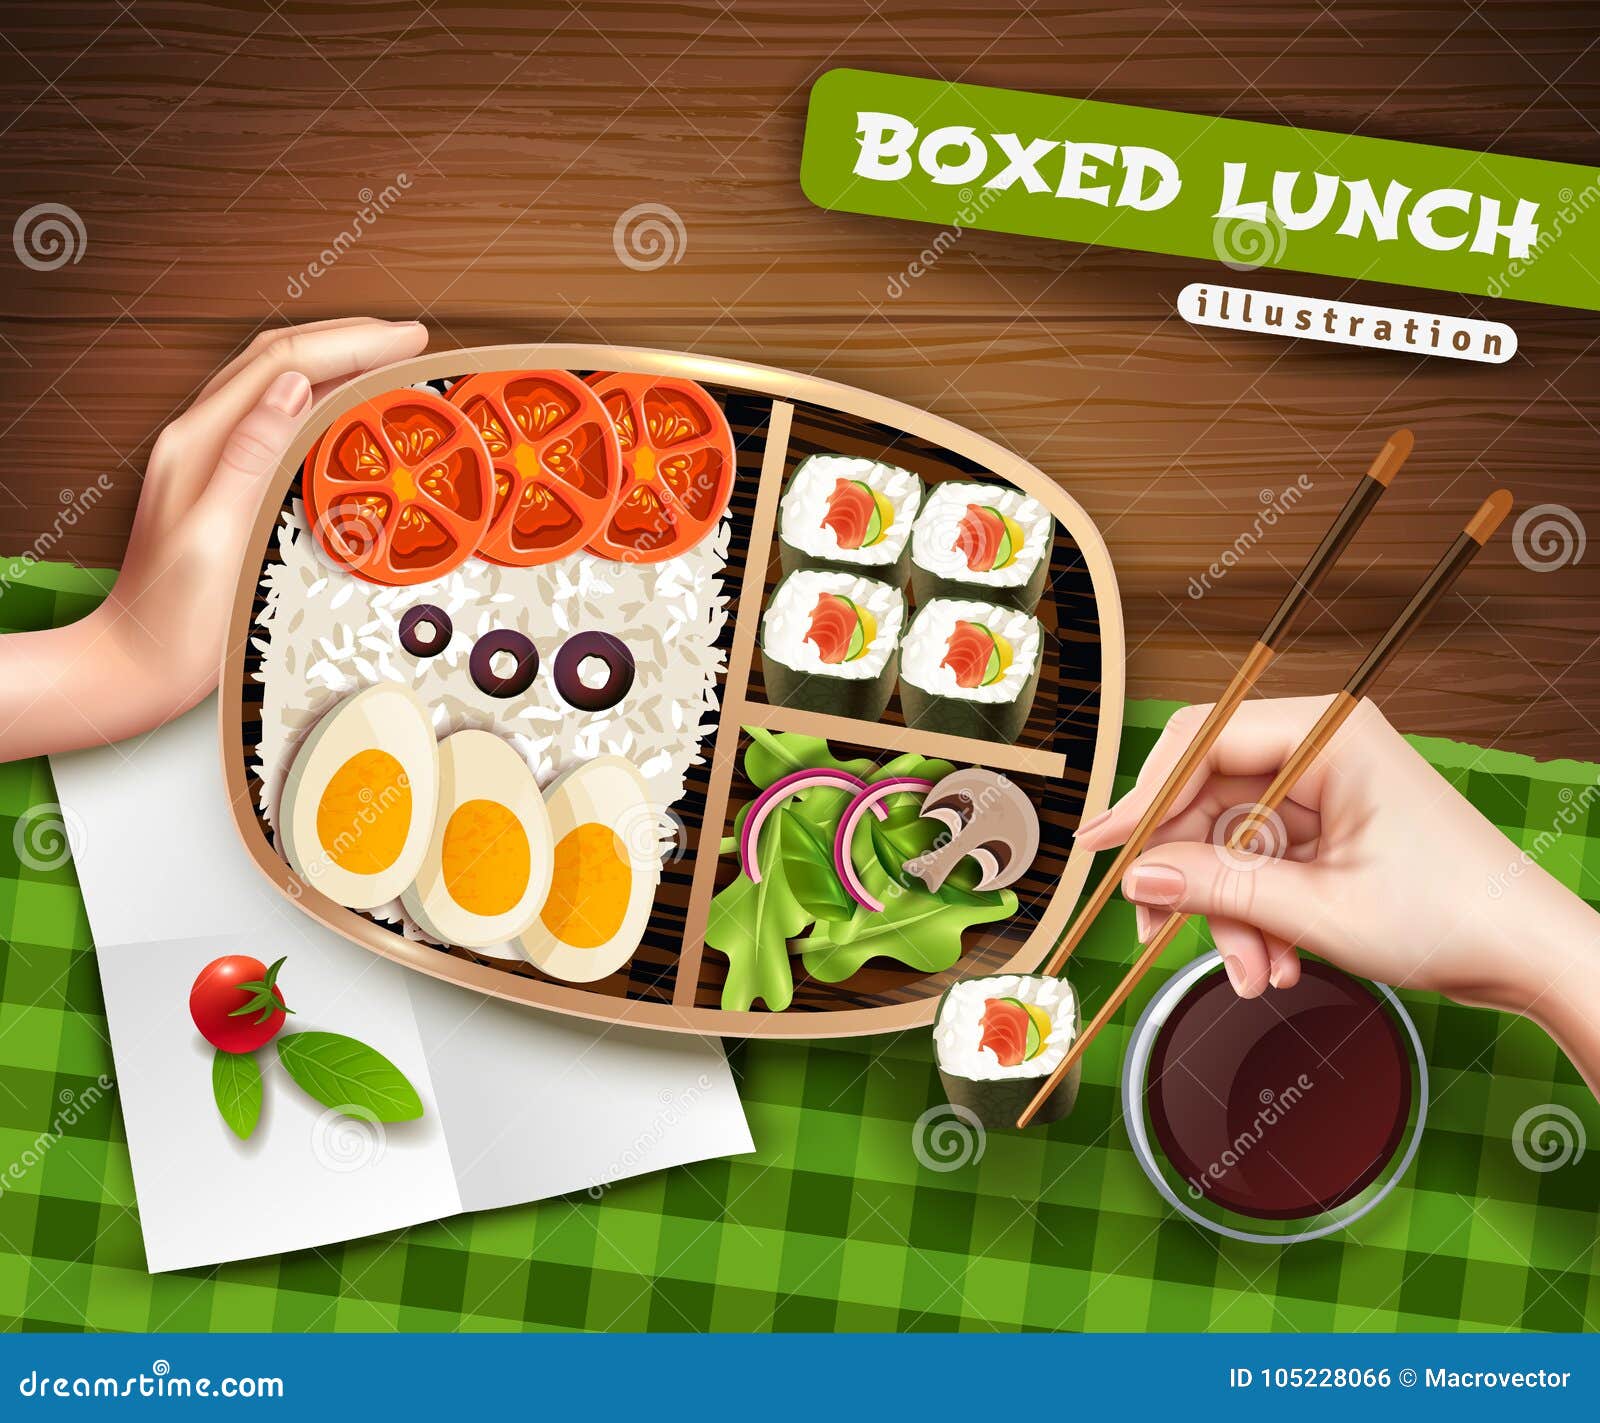 boxed lunch 